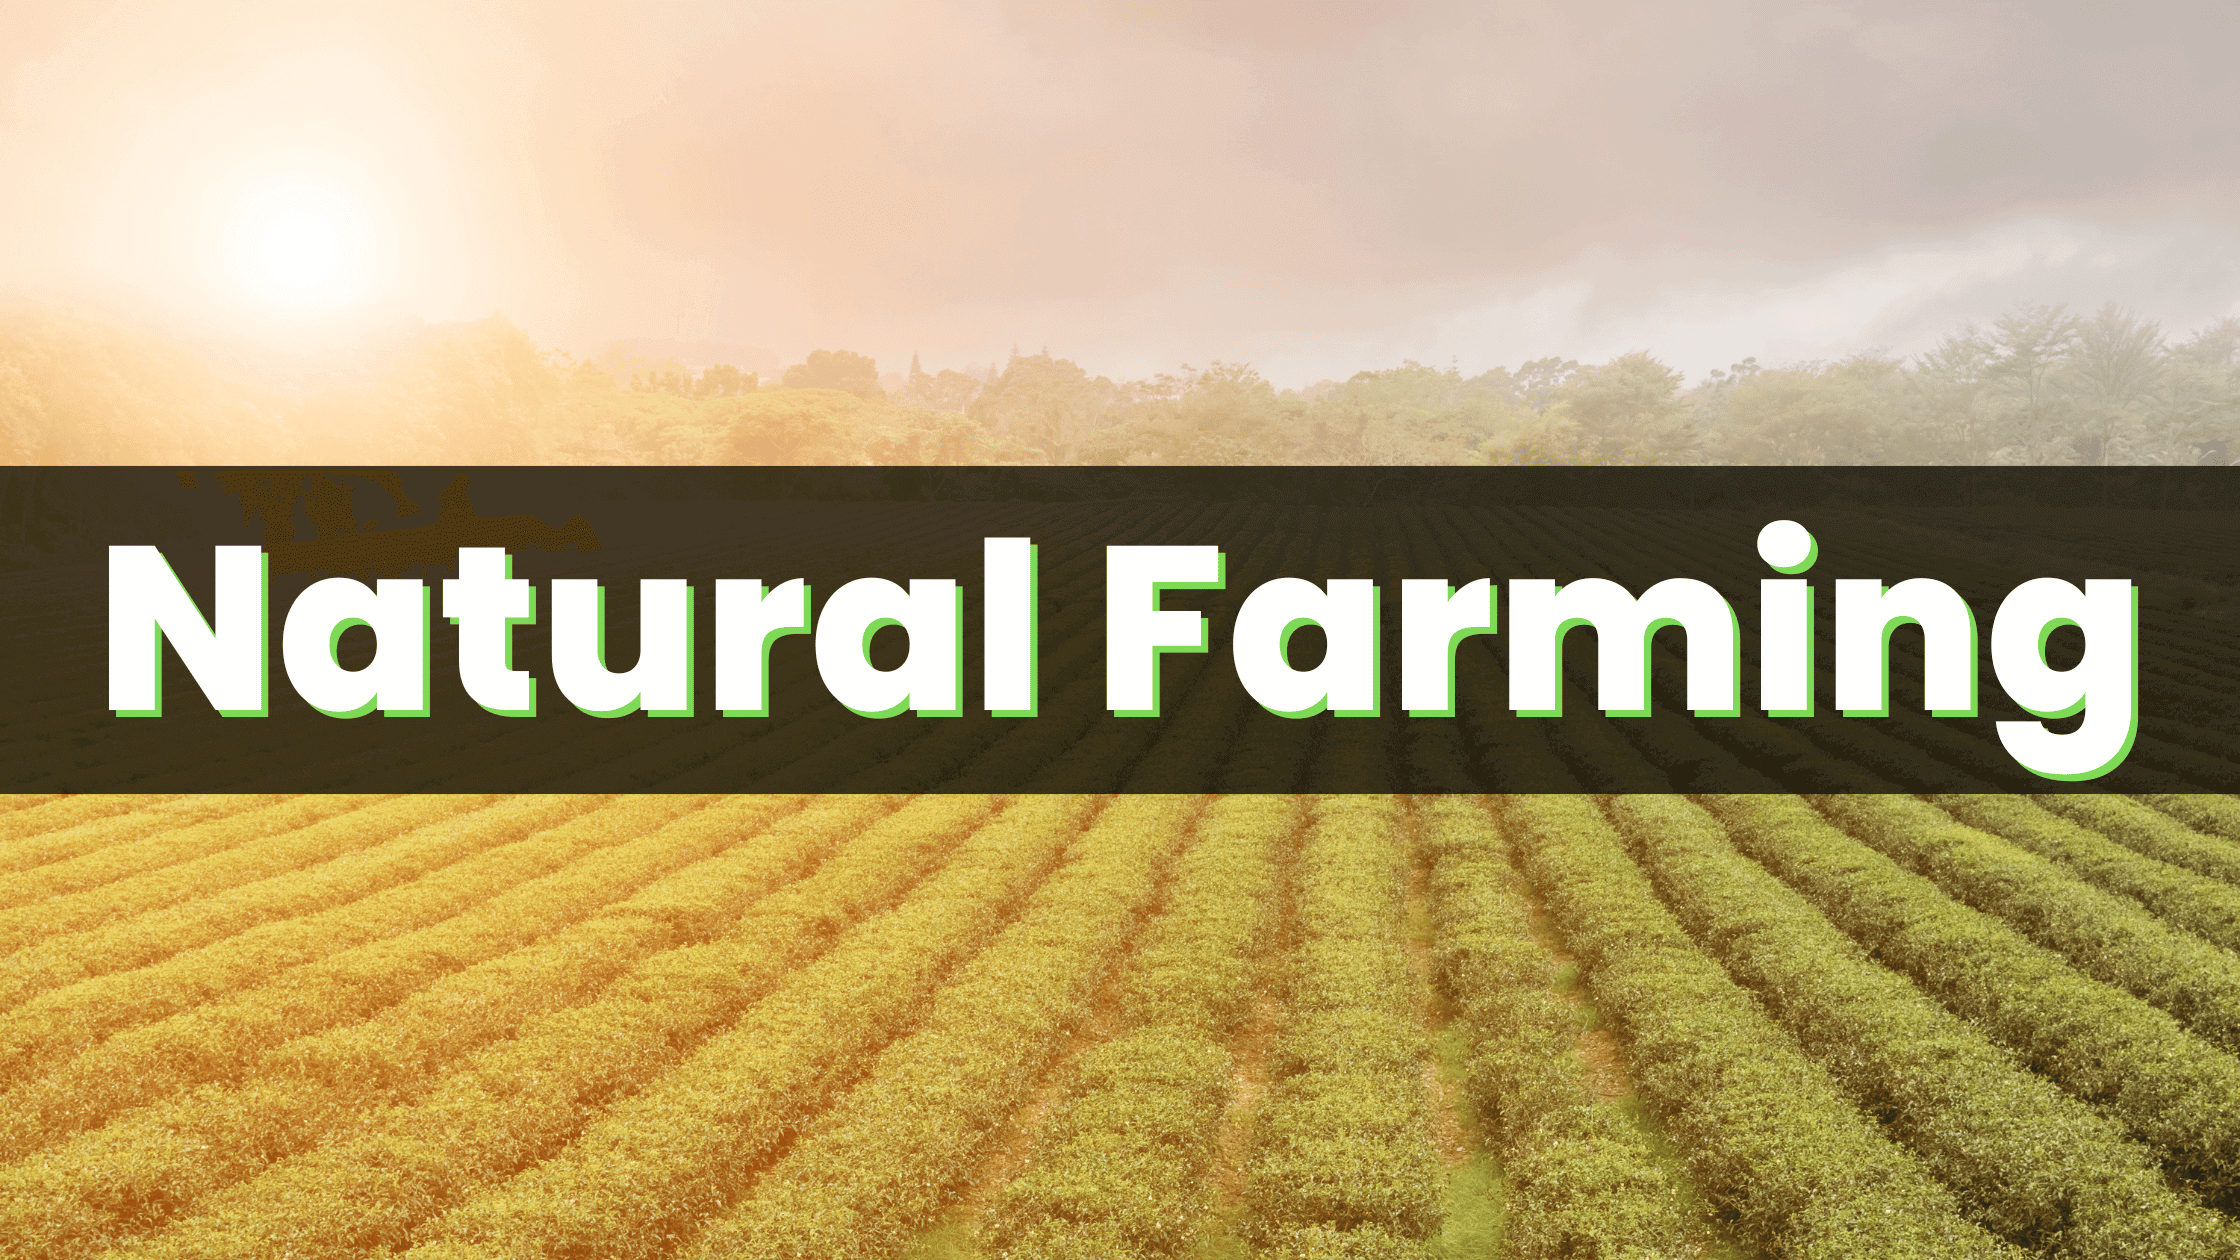 Natural Farming | Definition, History and Benefits